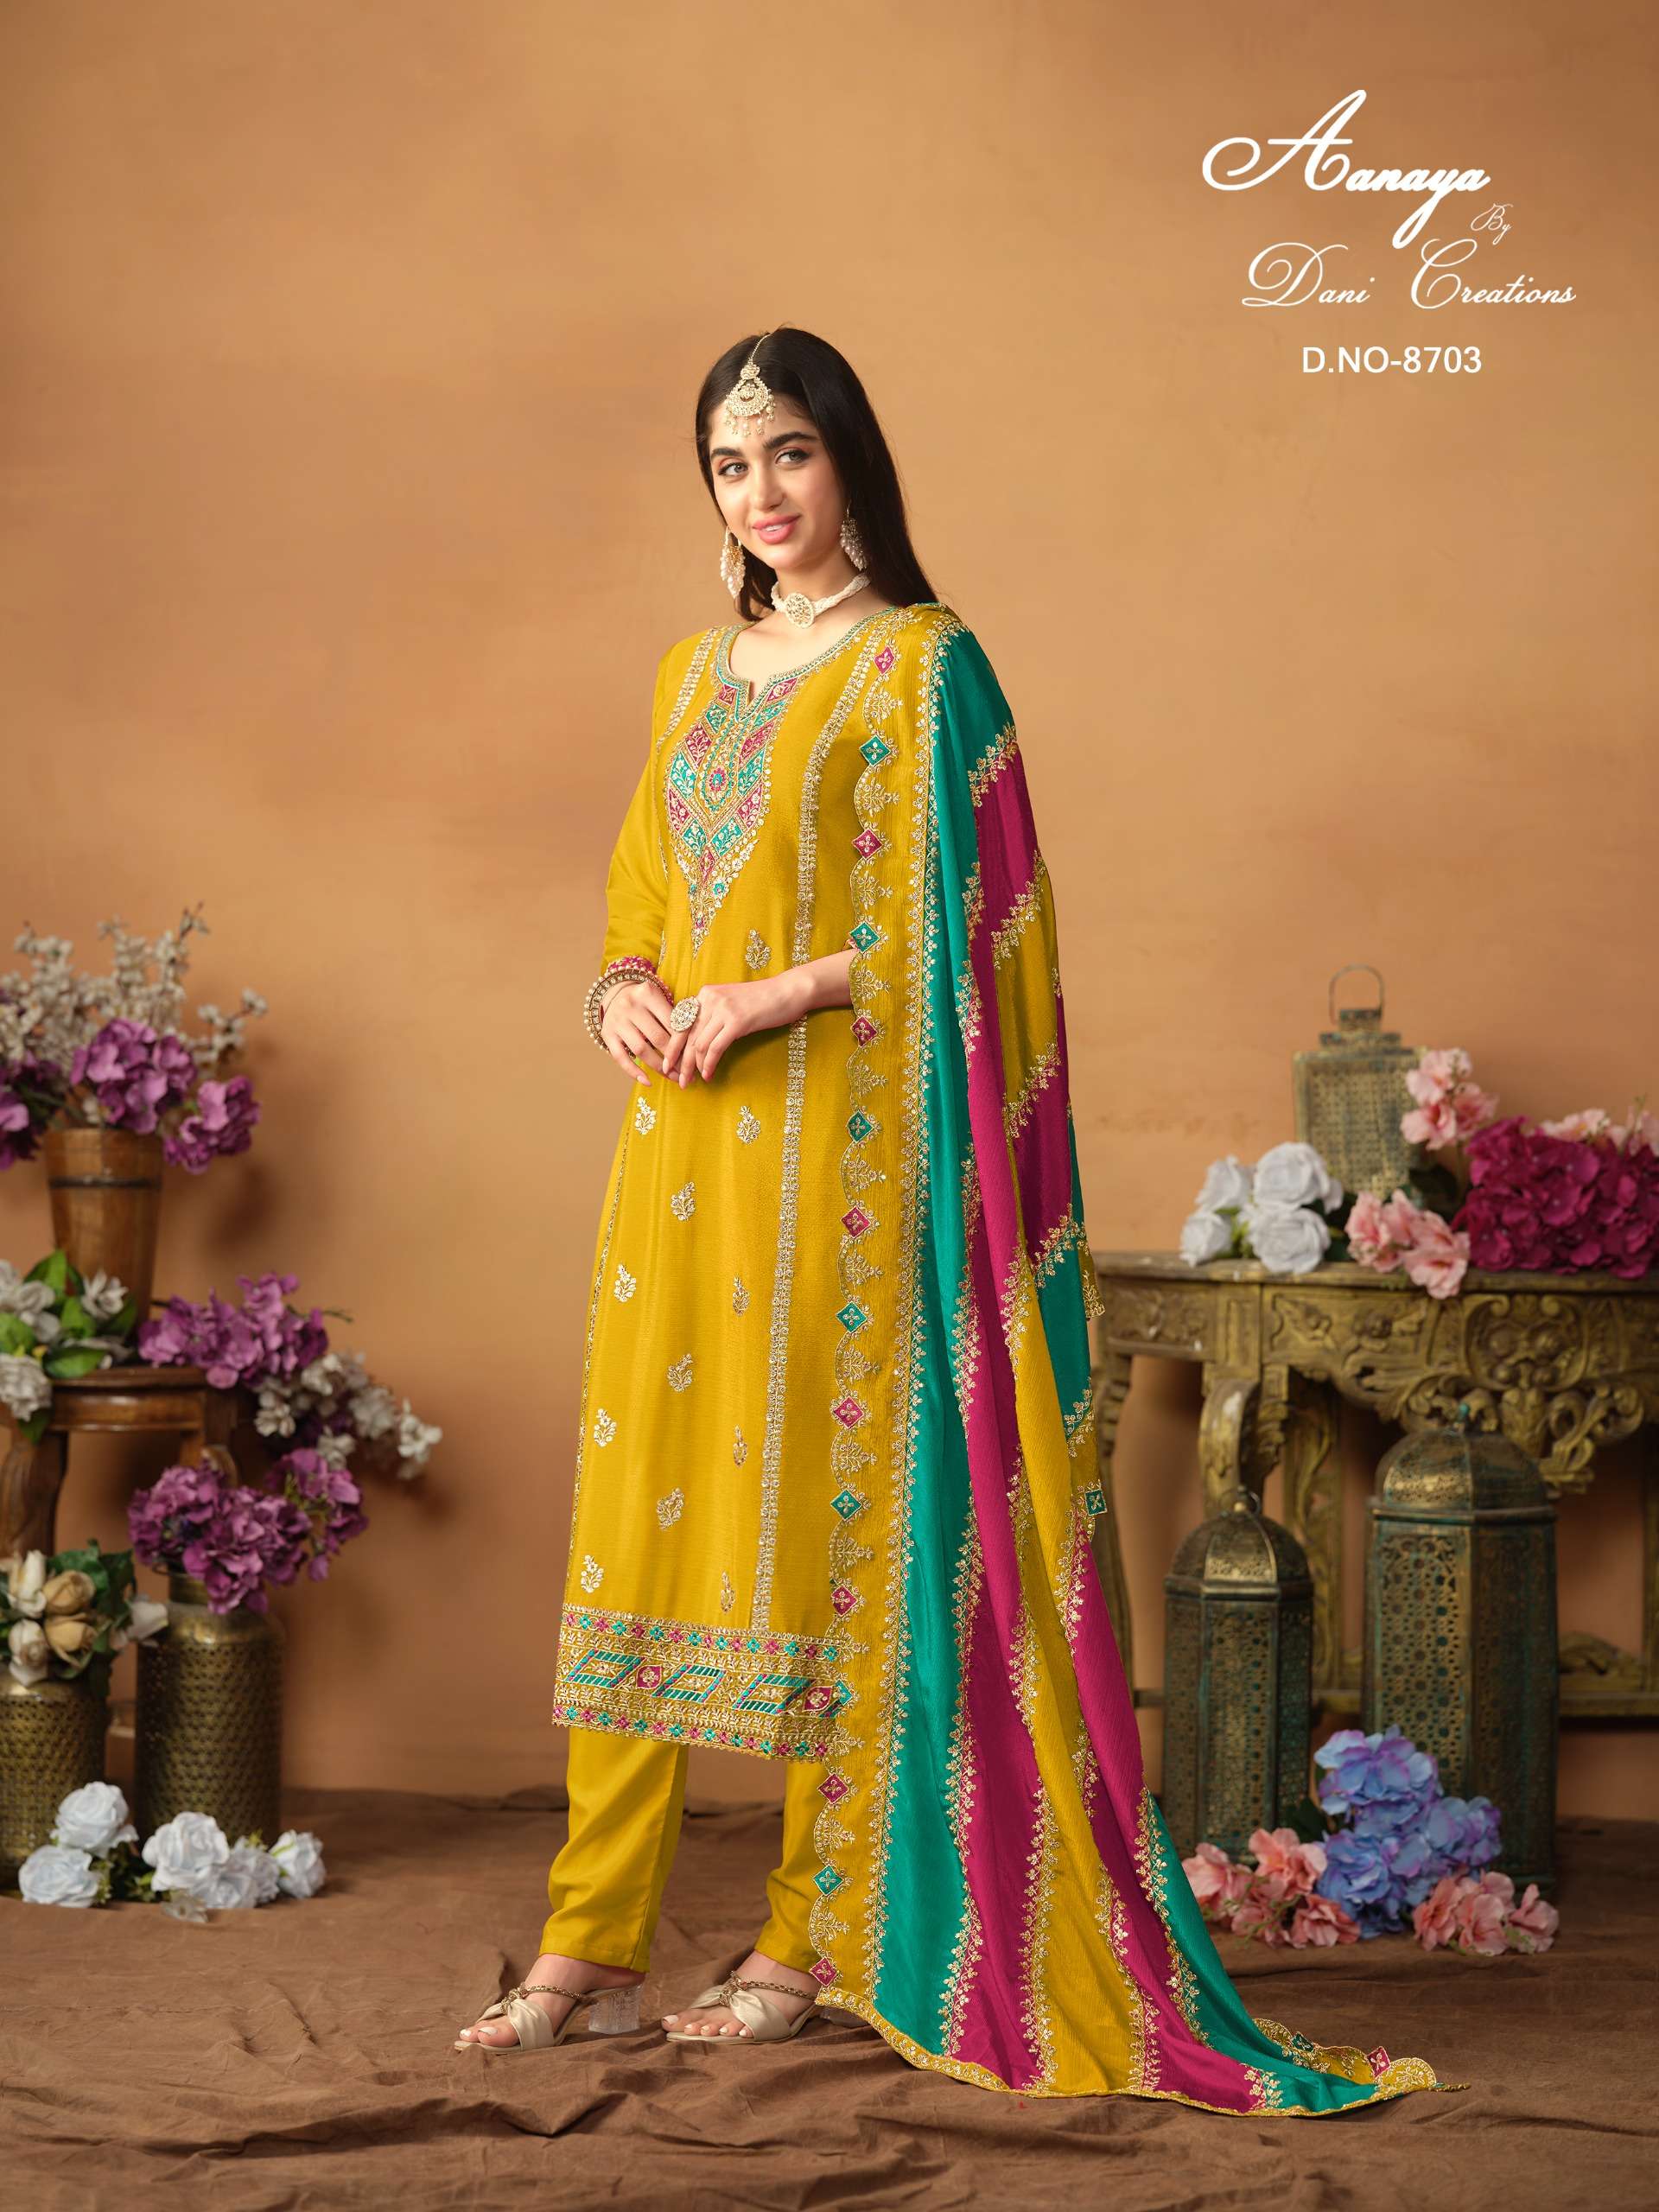 Aanaya Vol 187 8701 To 8703 Designer Style Straight Suit Latest Collection